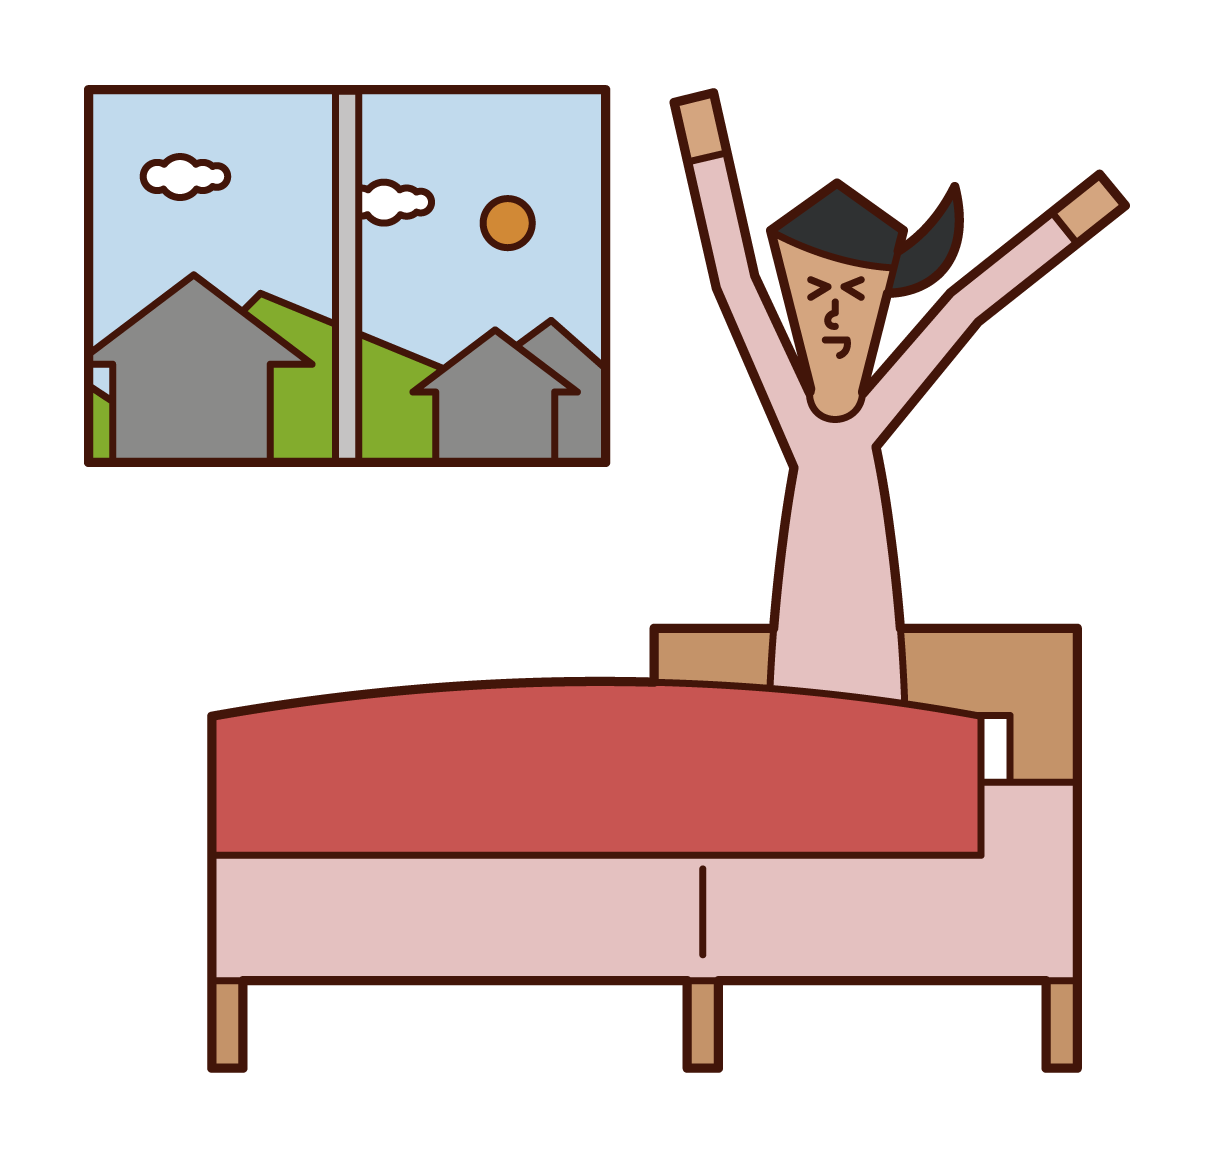 Illustration of a woman who wakes up